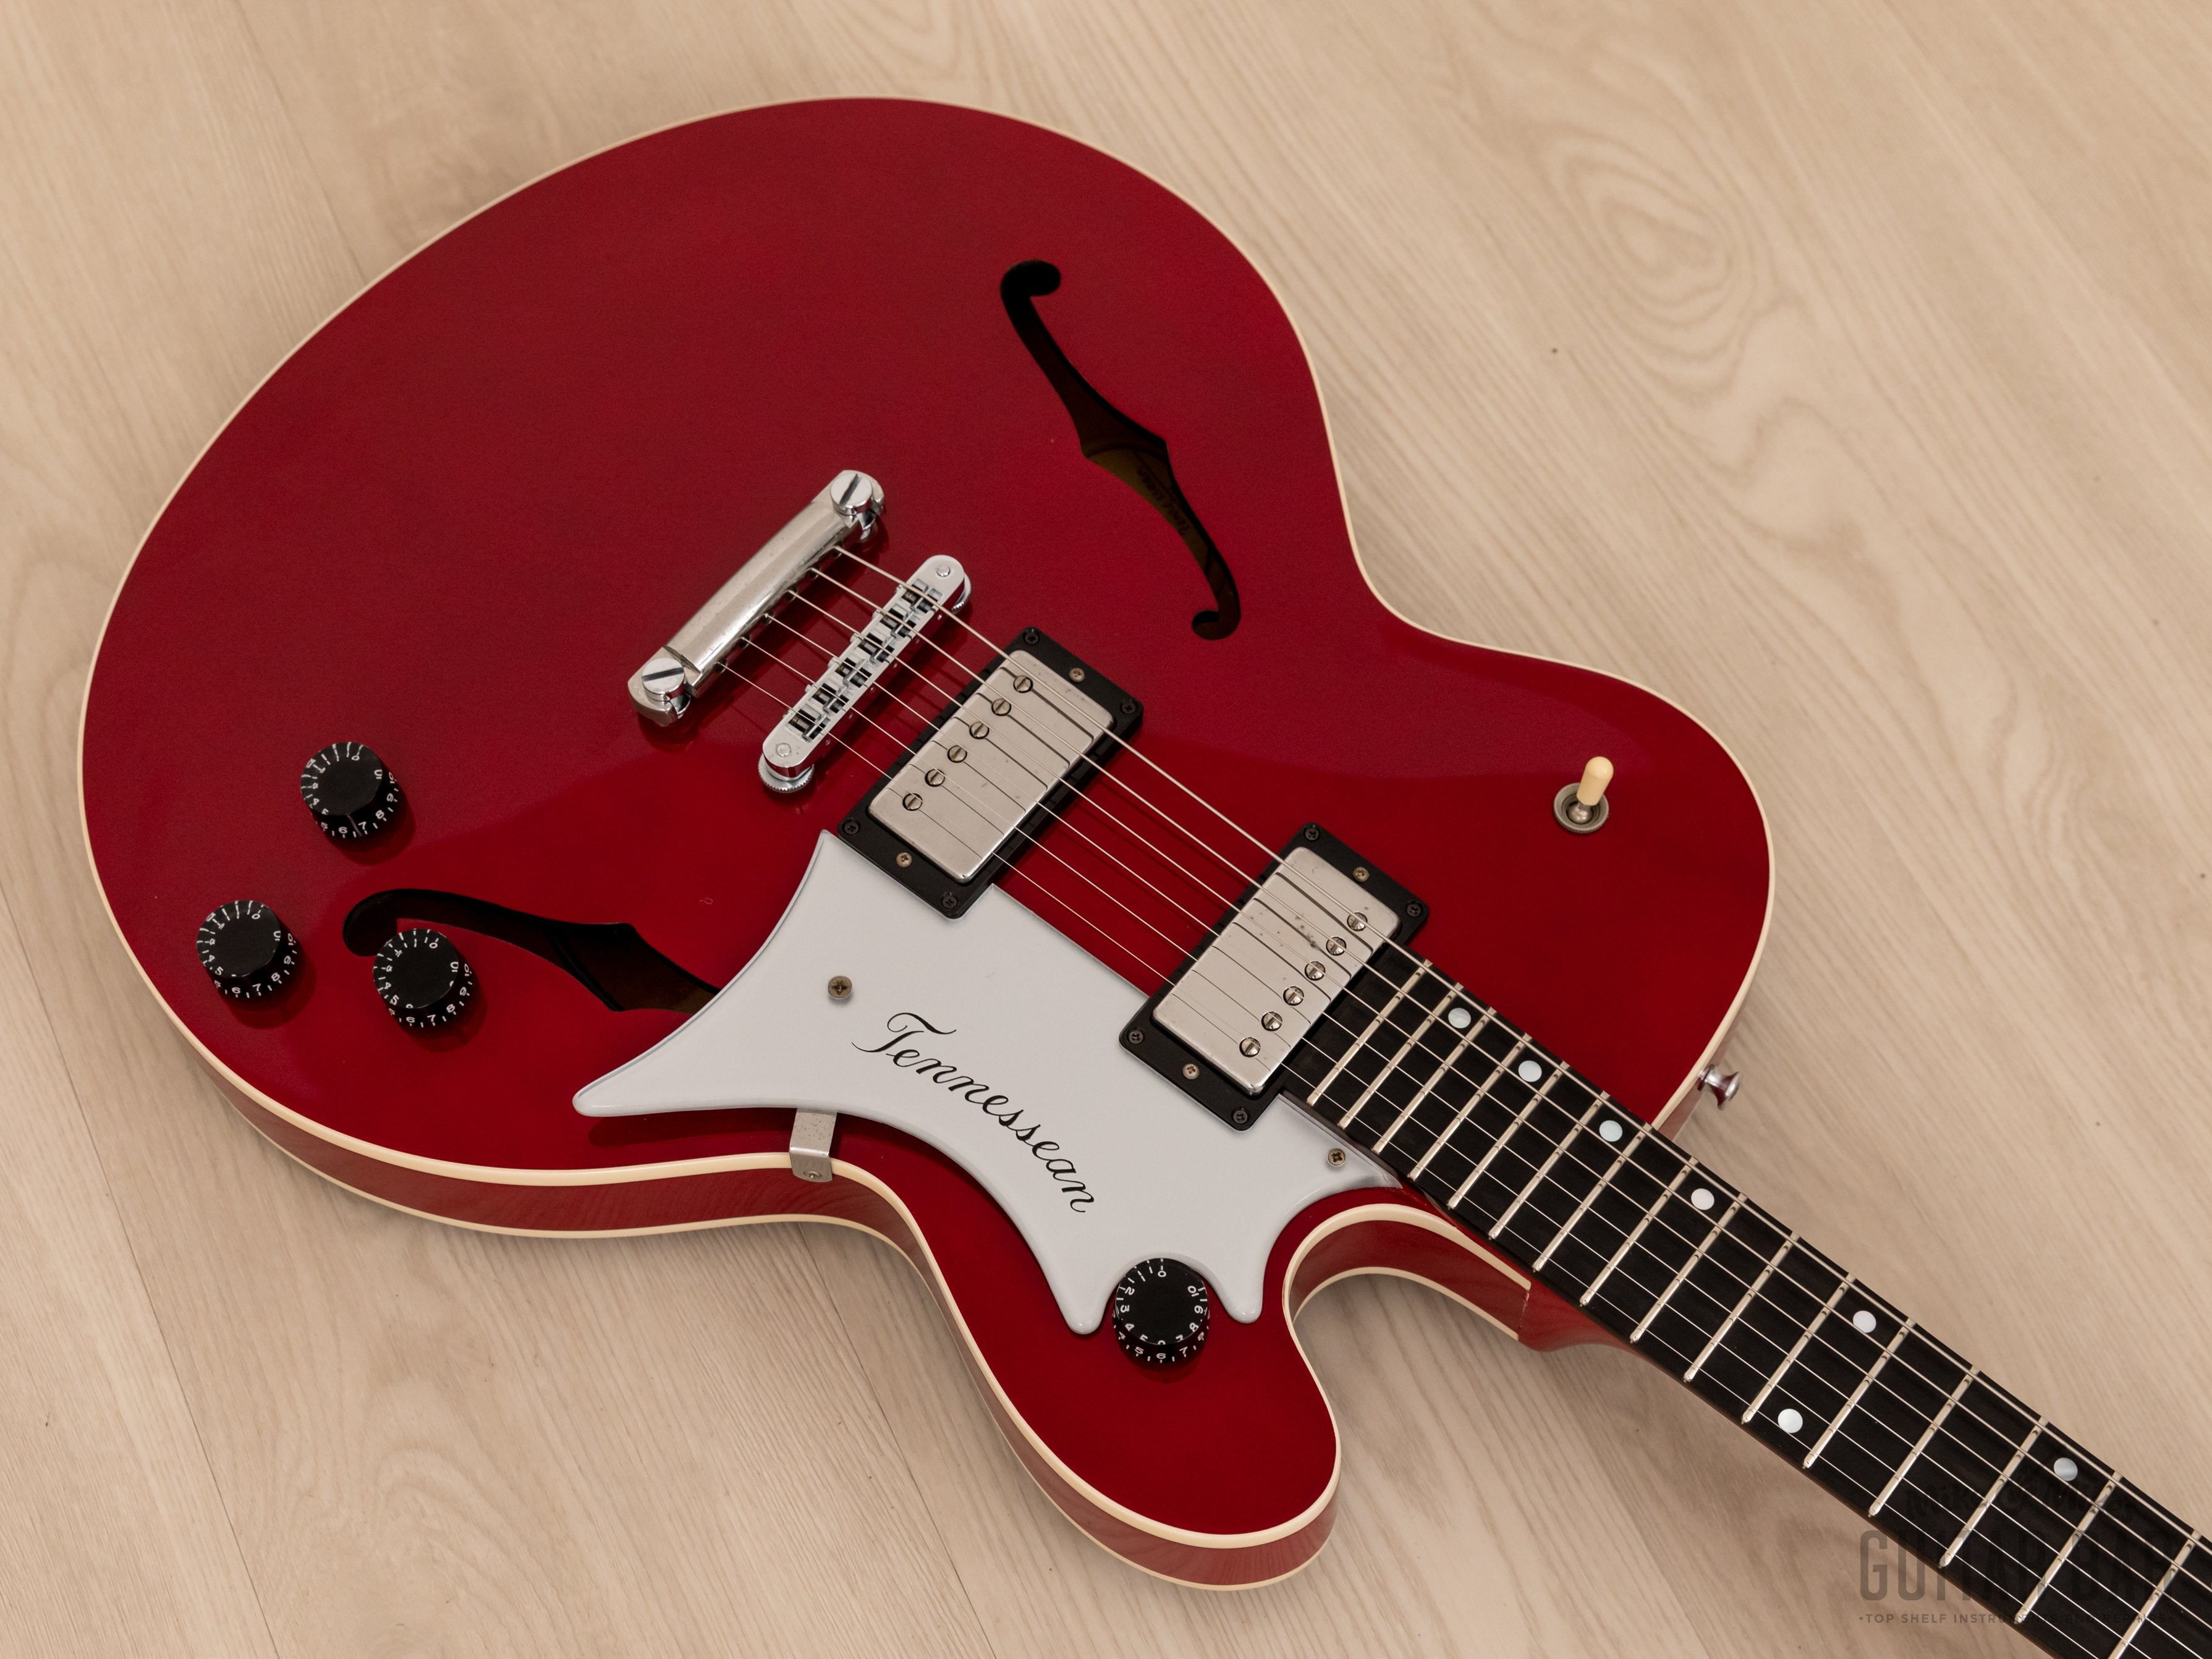 1990 Gibson Chet Atkins Tennessean Semi-Hollow Guitar Wine Red Near-Mint w/ Case & Tags, Yamano